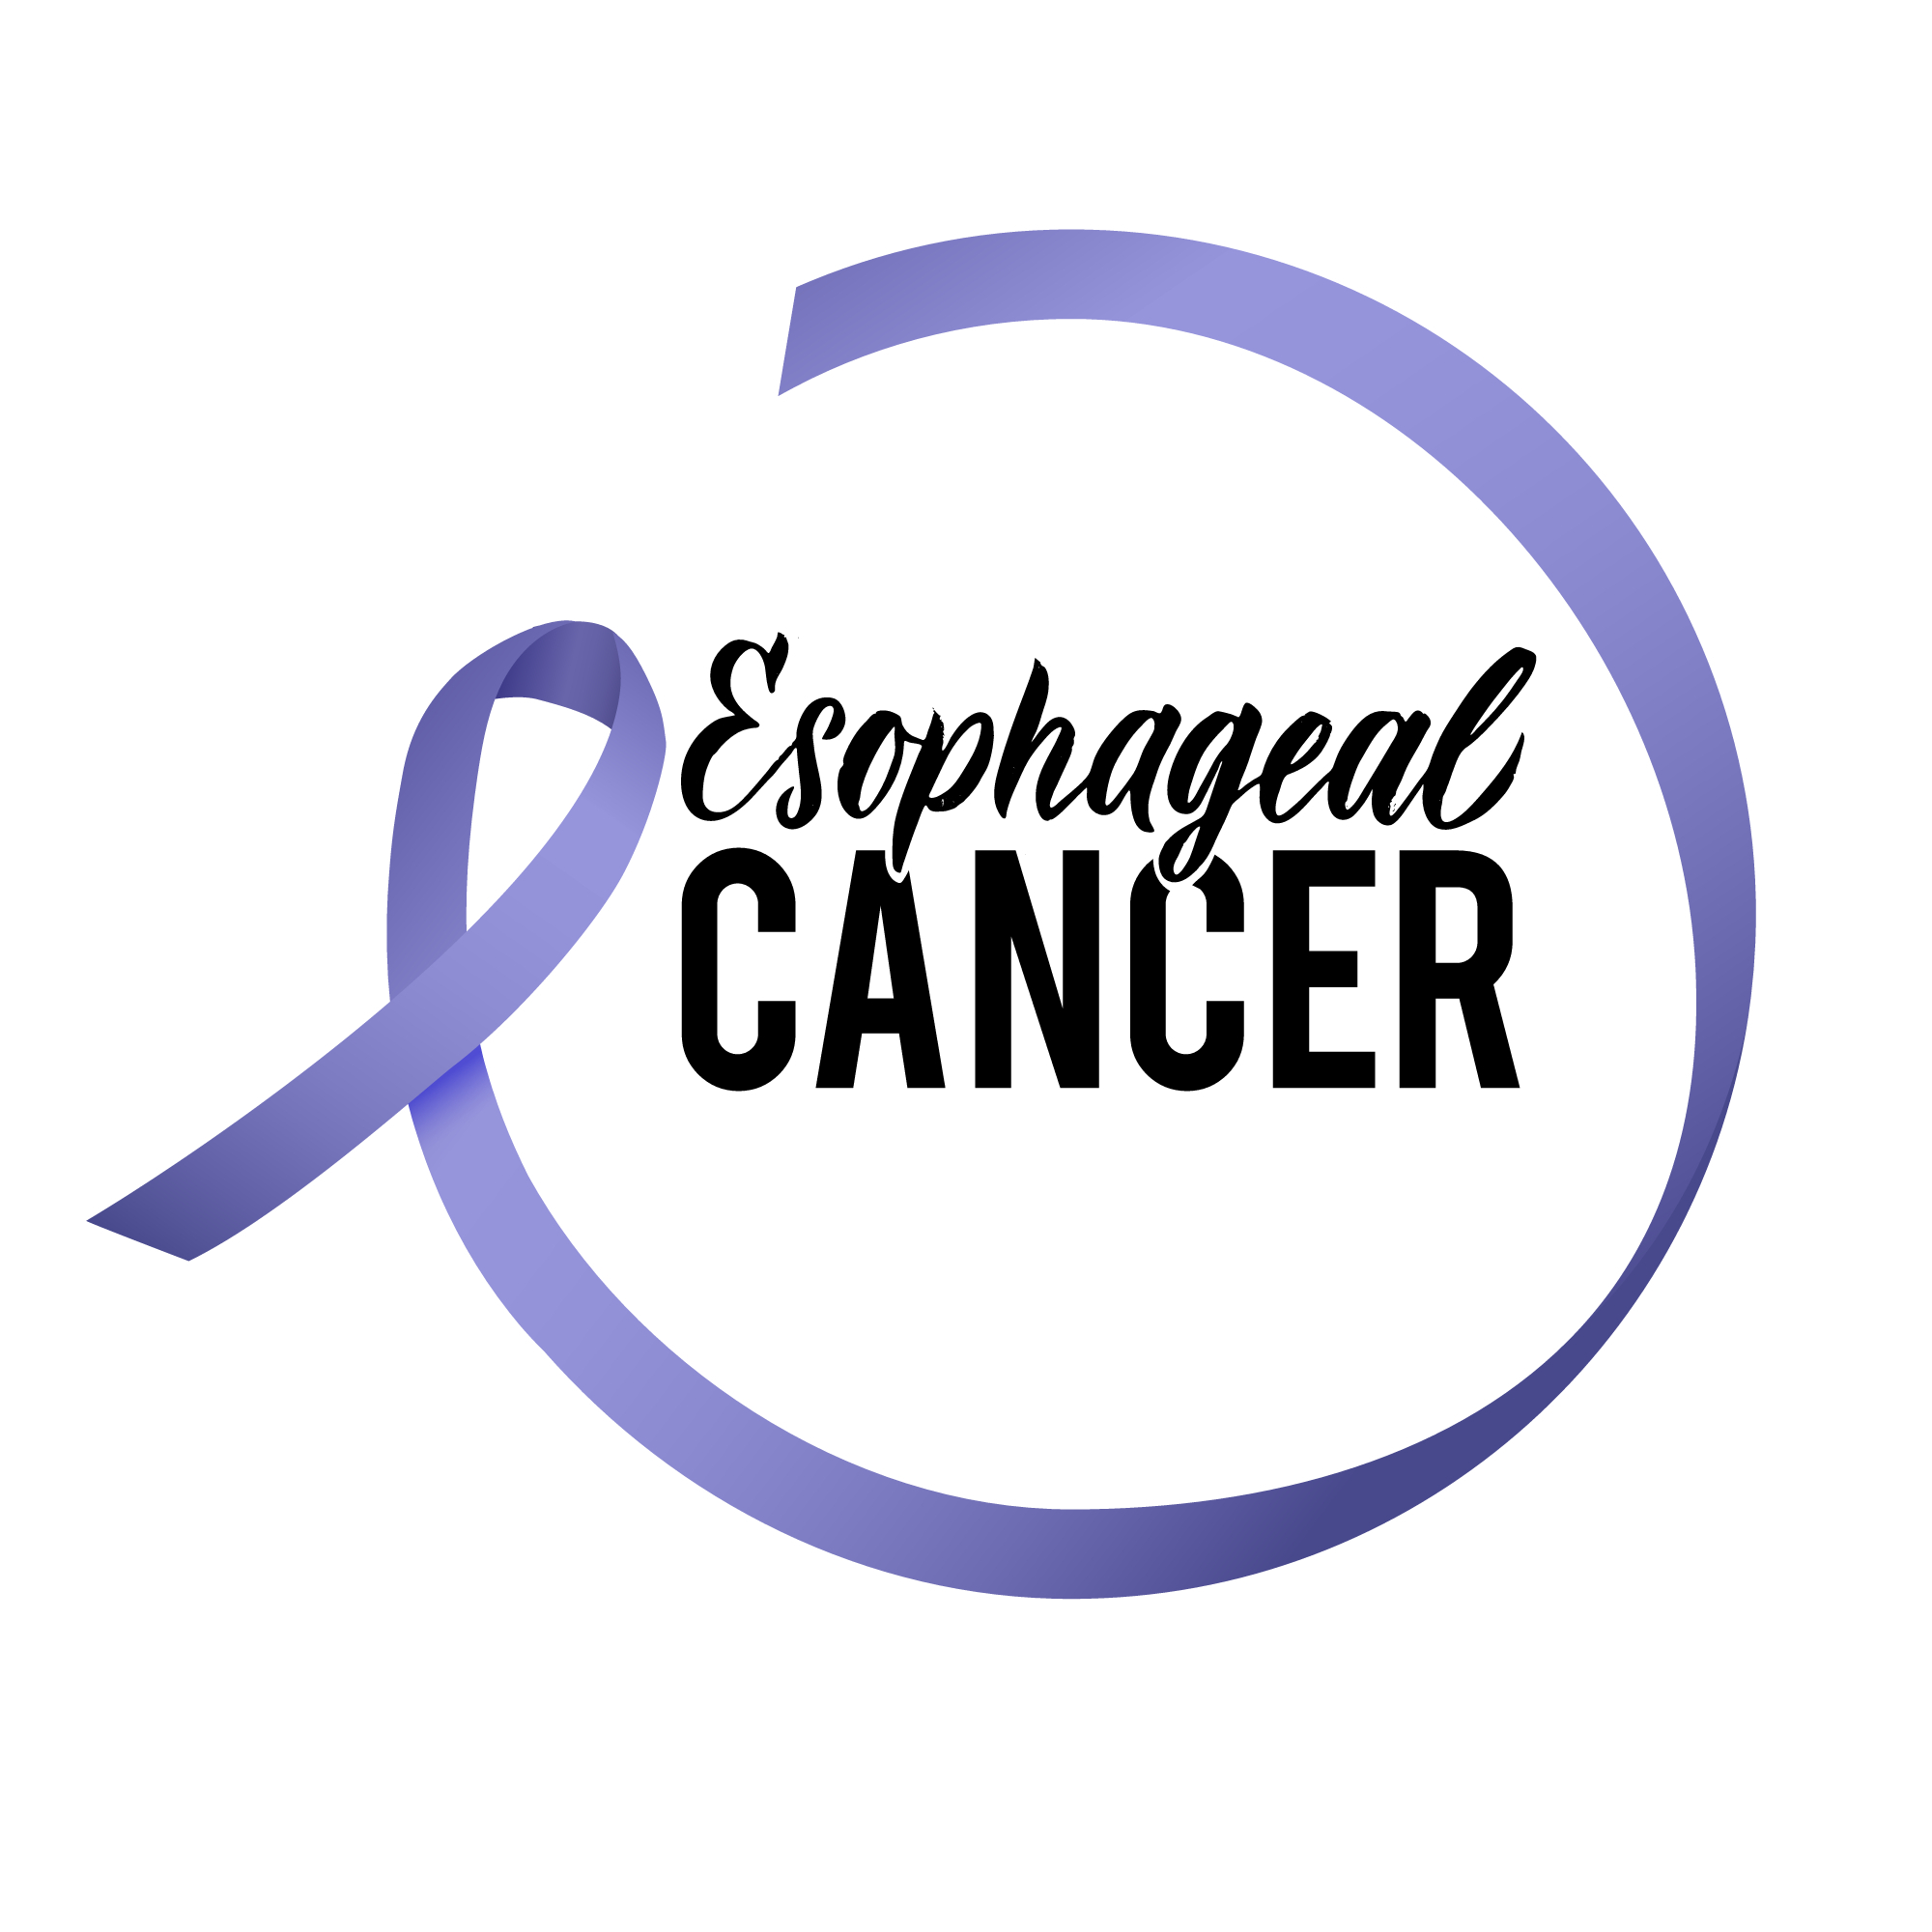 Esophageal Cancer with purple ribbon for awareness